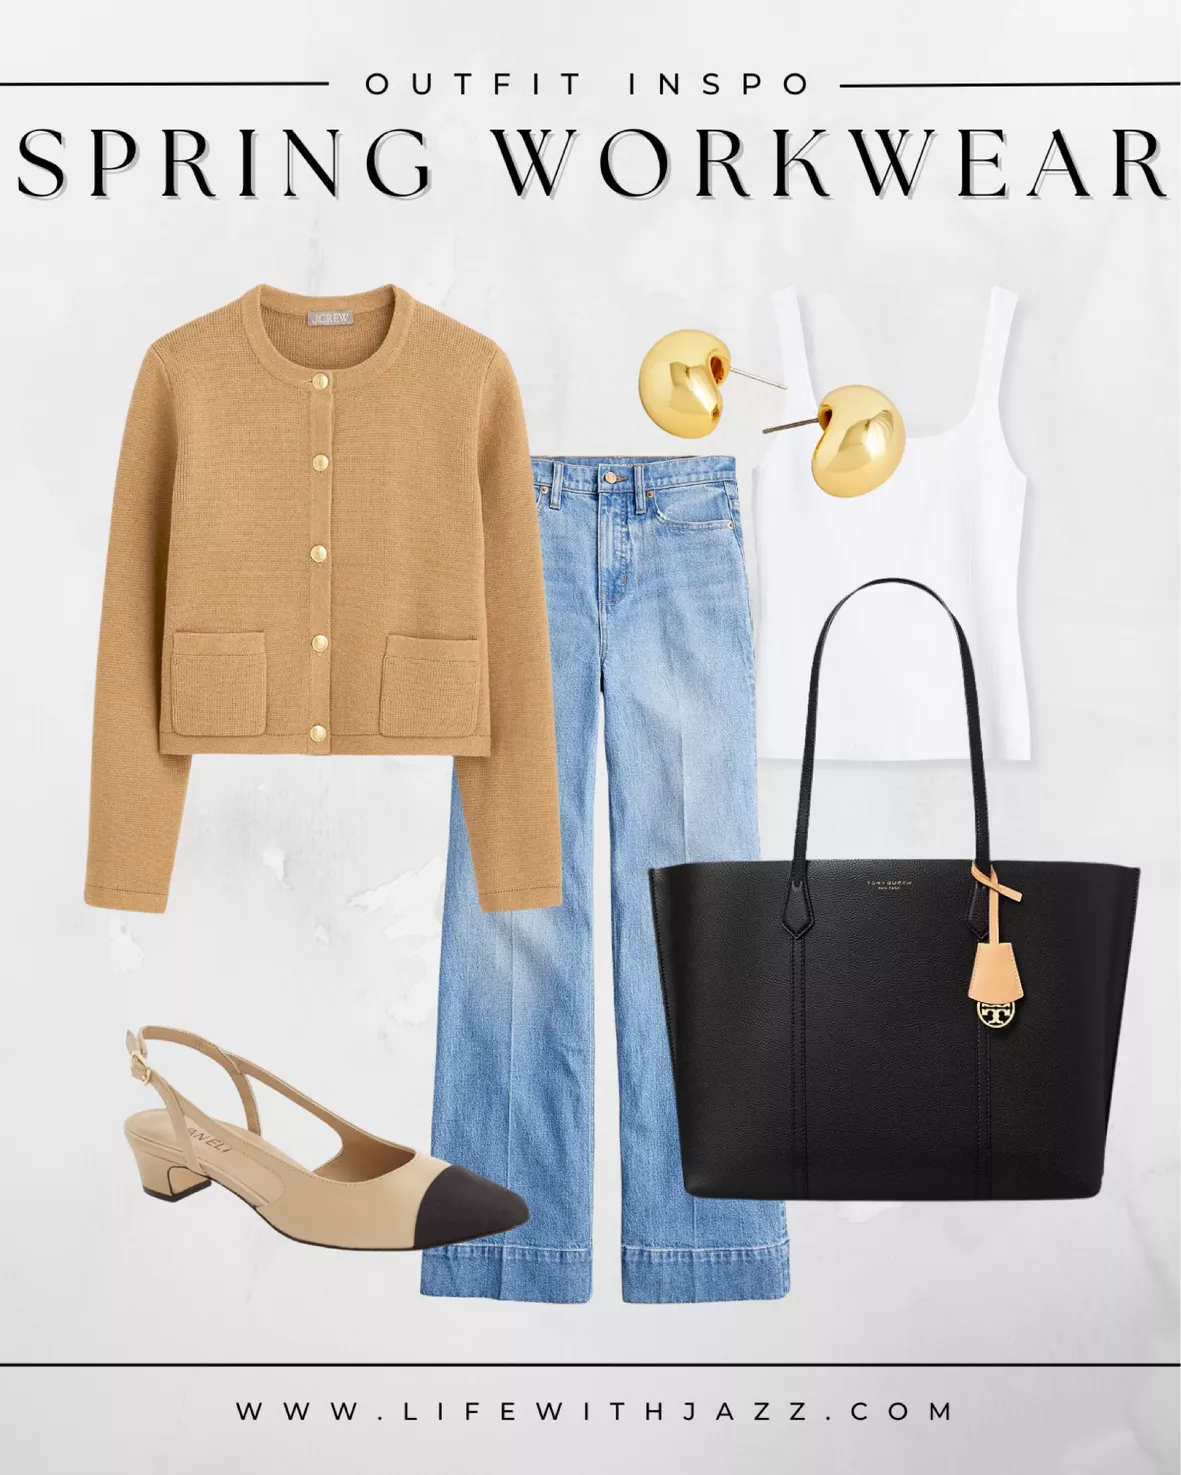 Elegant Workwear Outfits for the Week - LIFE WITH JAZZ